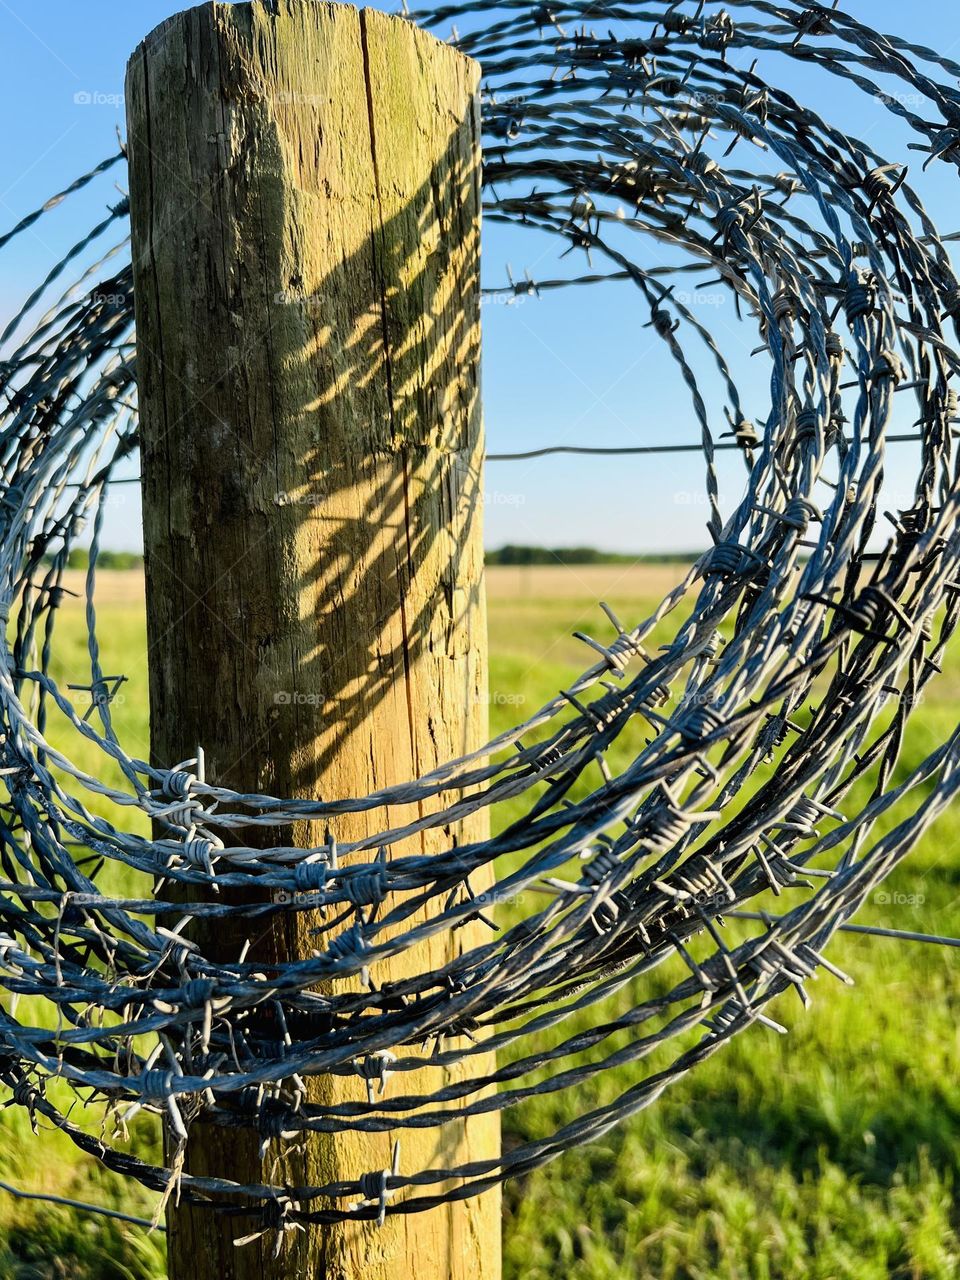 Circles of barbed wire hanging over a wooden fence post in a pasture.